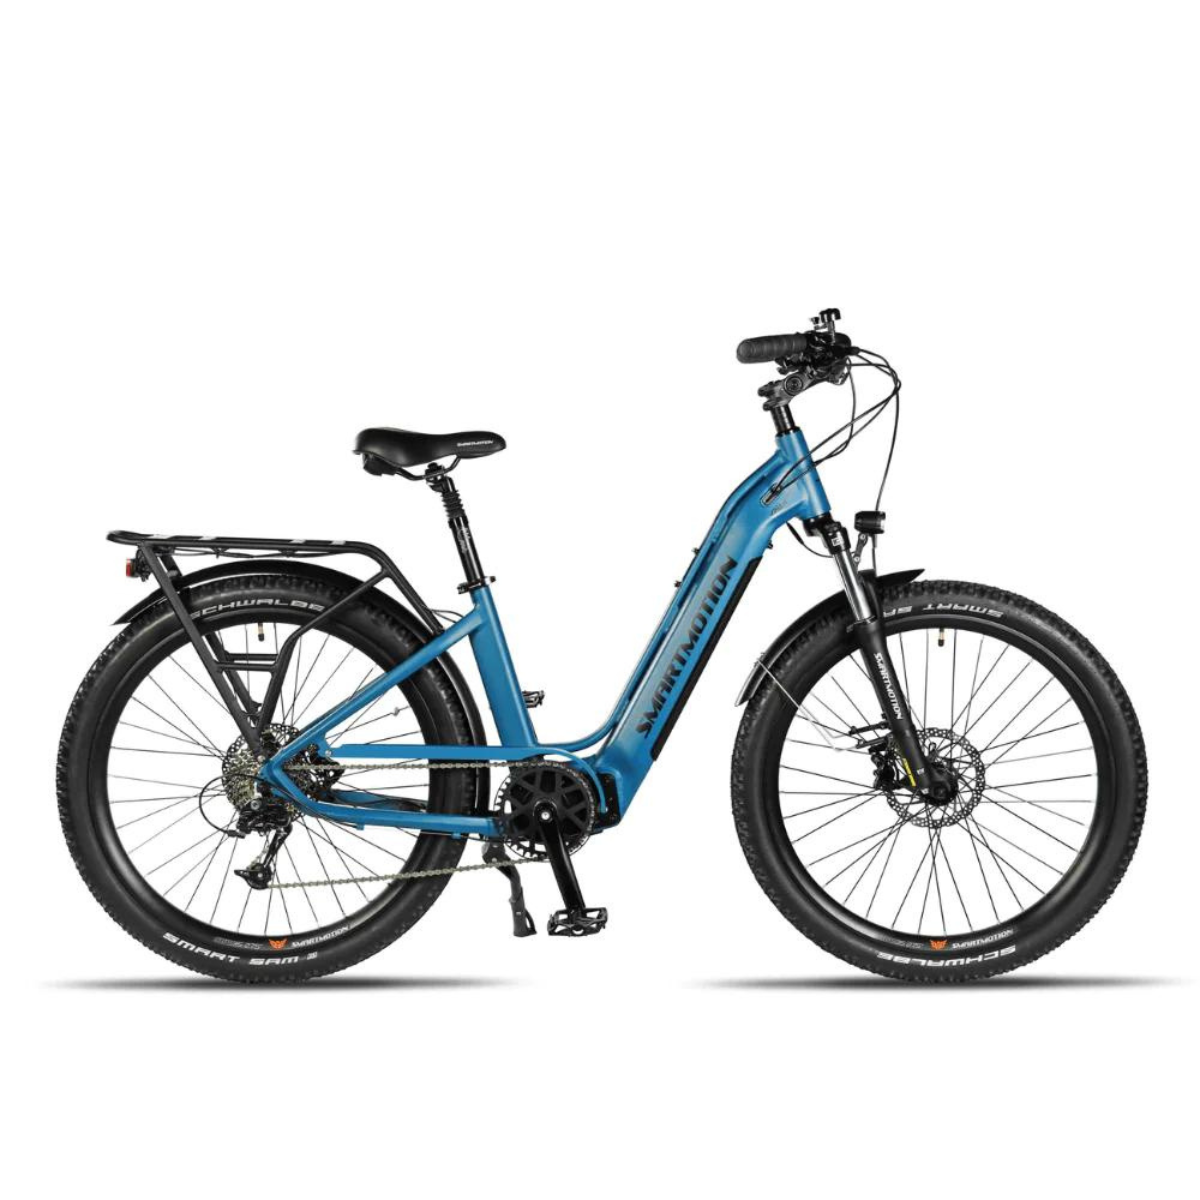 Smartmotion XCity Neo MED 16 FRAME